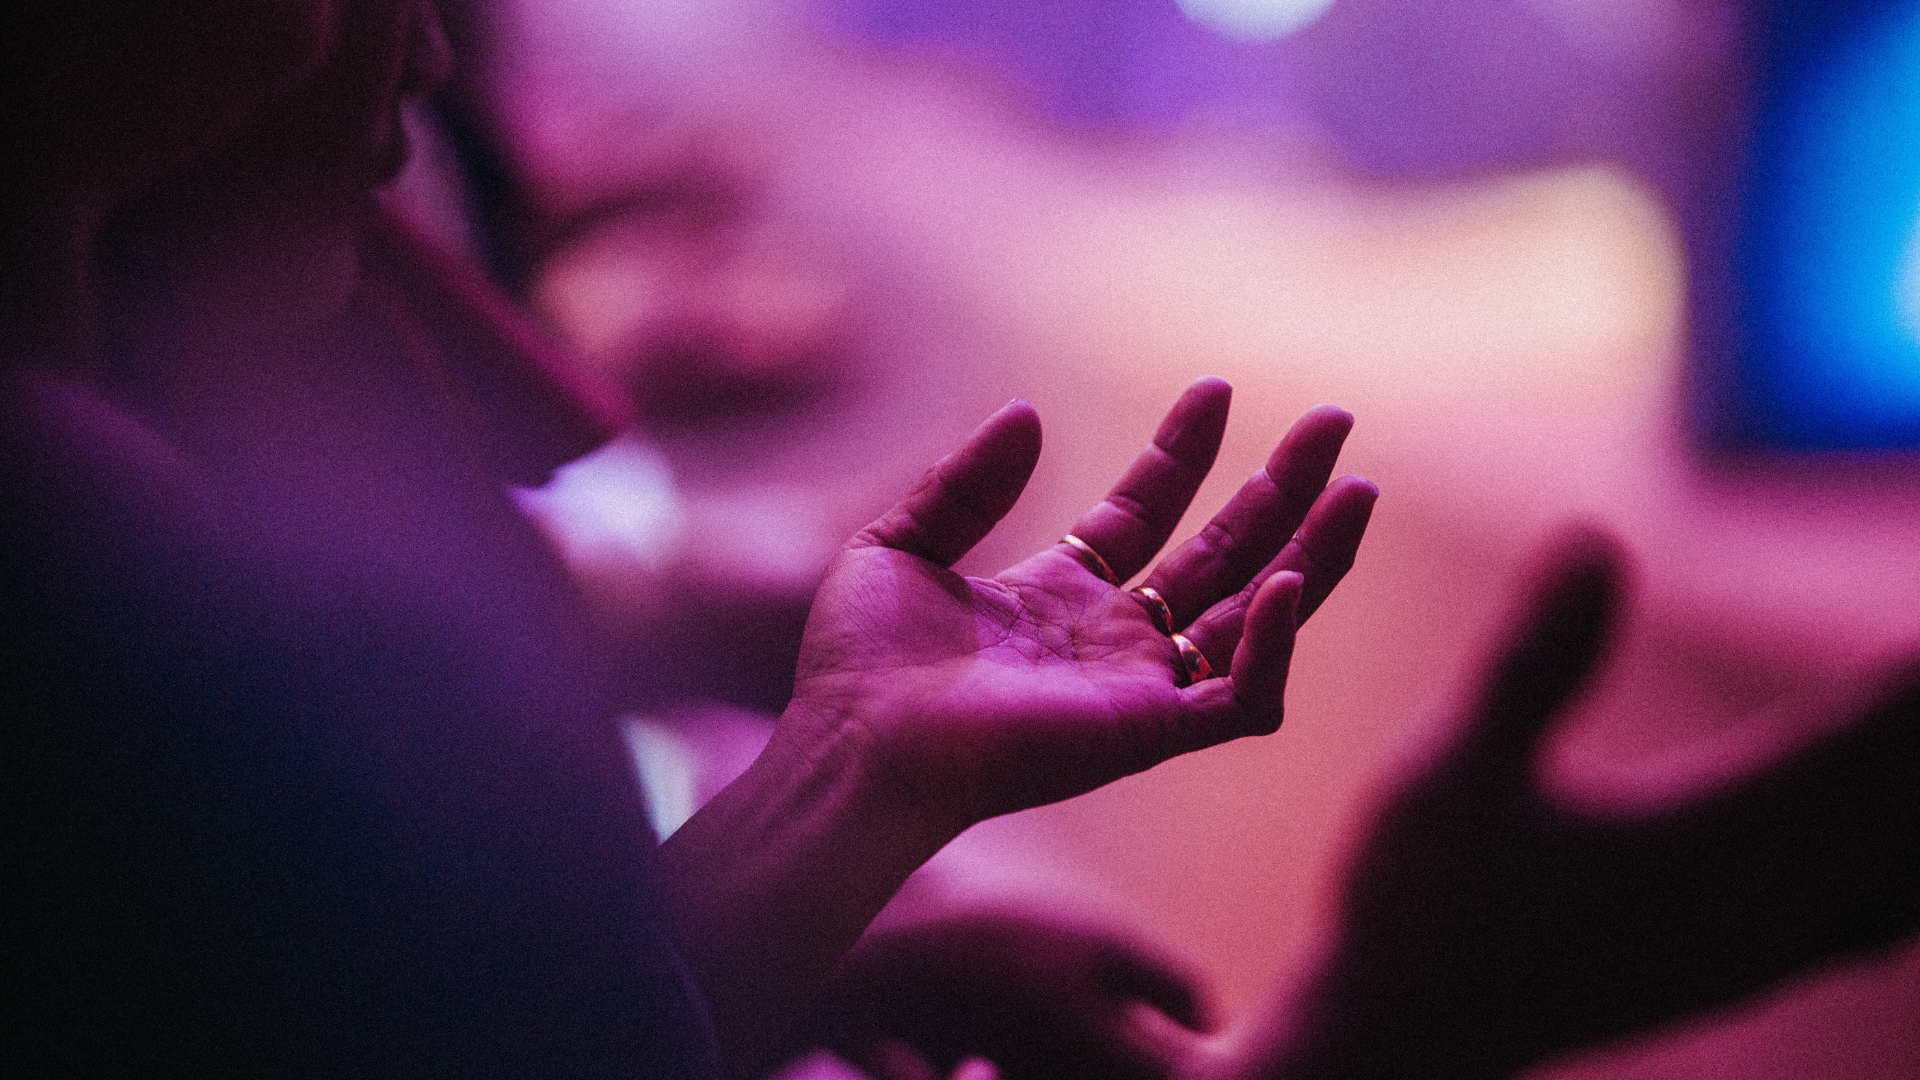 purple light shining down on someone's hands as they're holding them out to worship